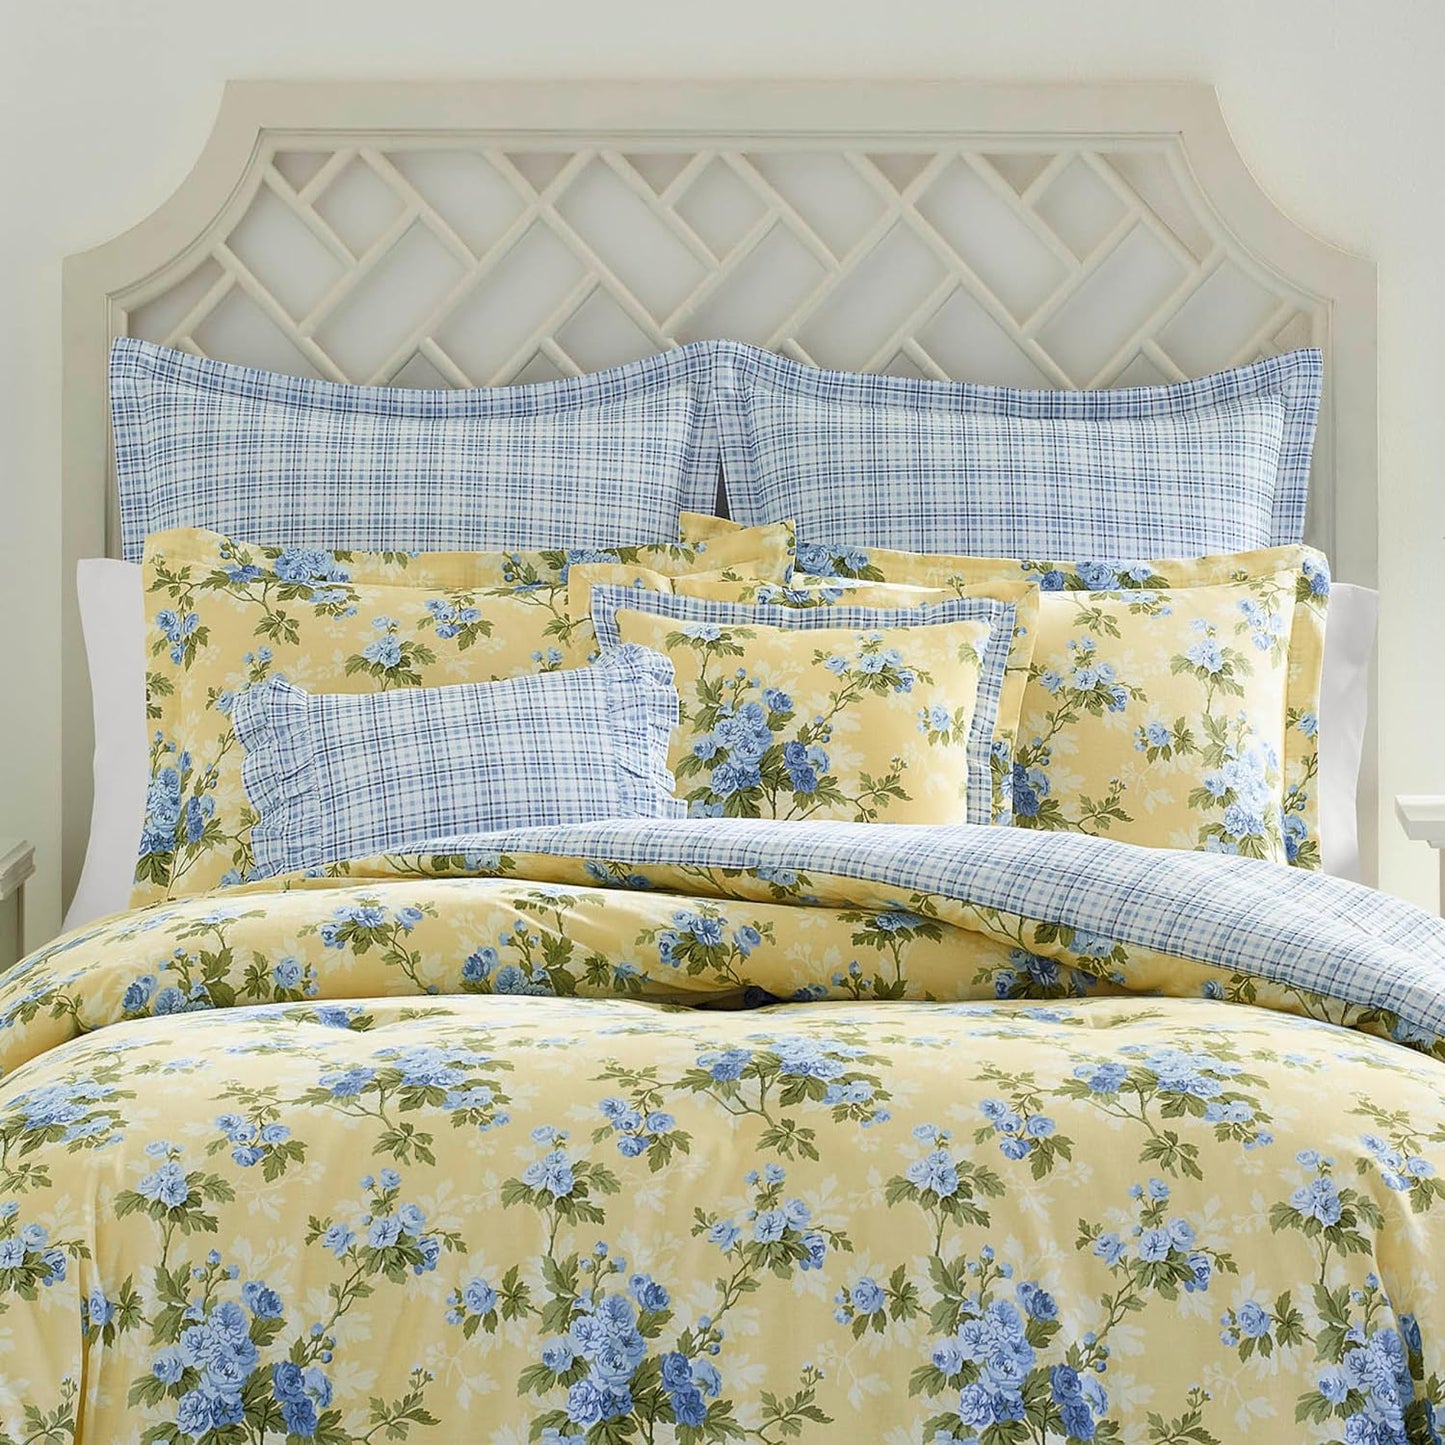 Laura Ashley Brand- Queen, King Comforter Set, Cotton Reversible Bedding, Includes Matching Shams with Bonus Euro Shams & Throw Pillows (Cassidy Yellow, King)